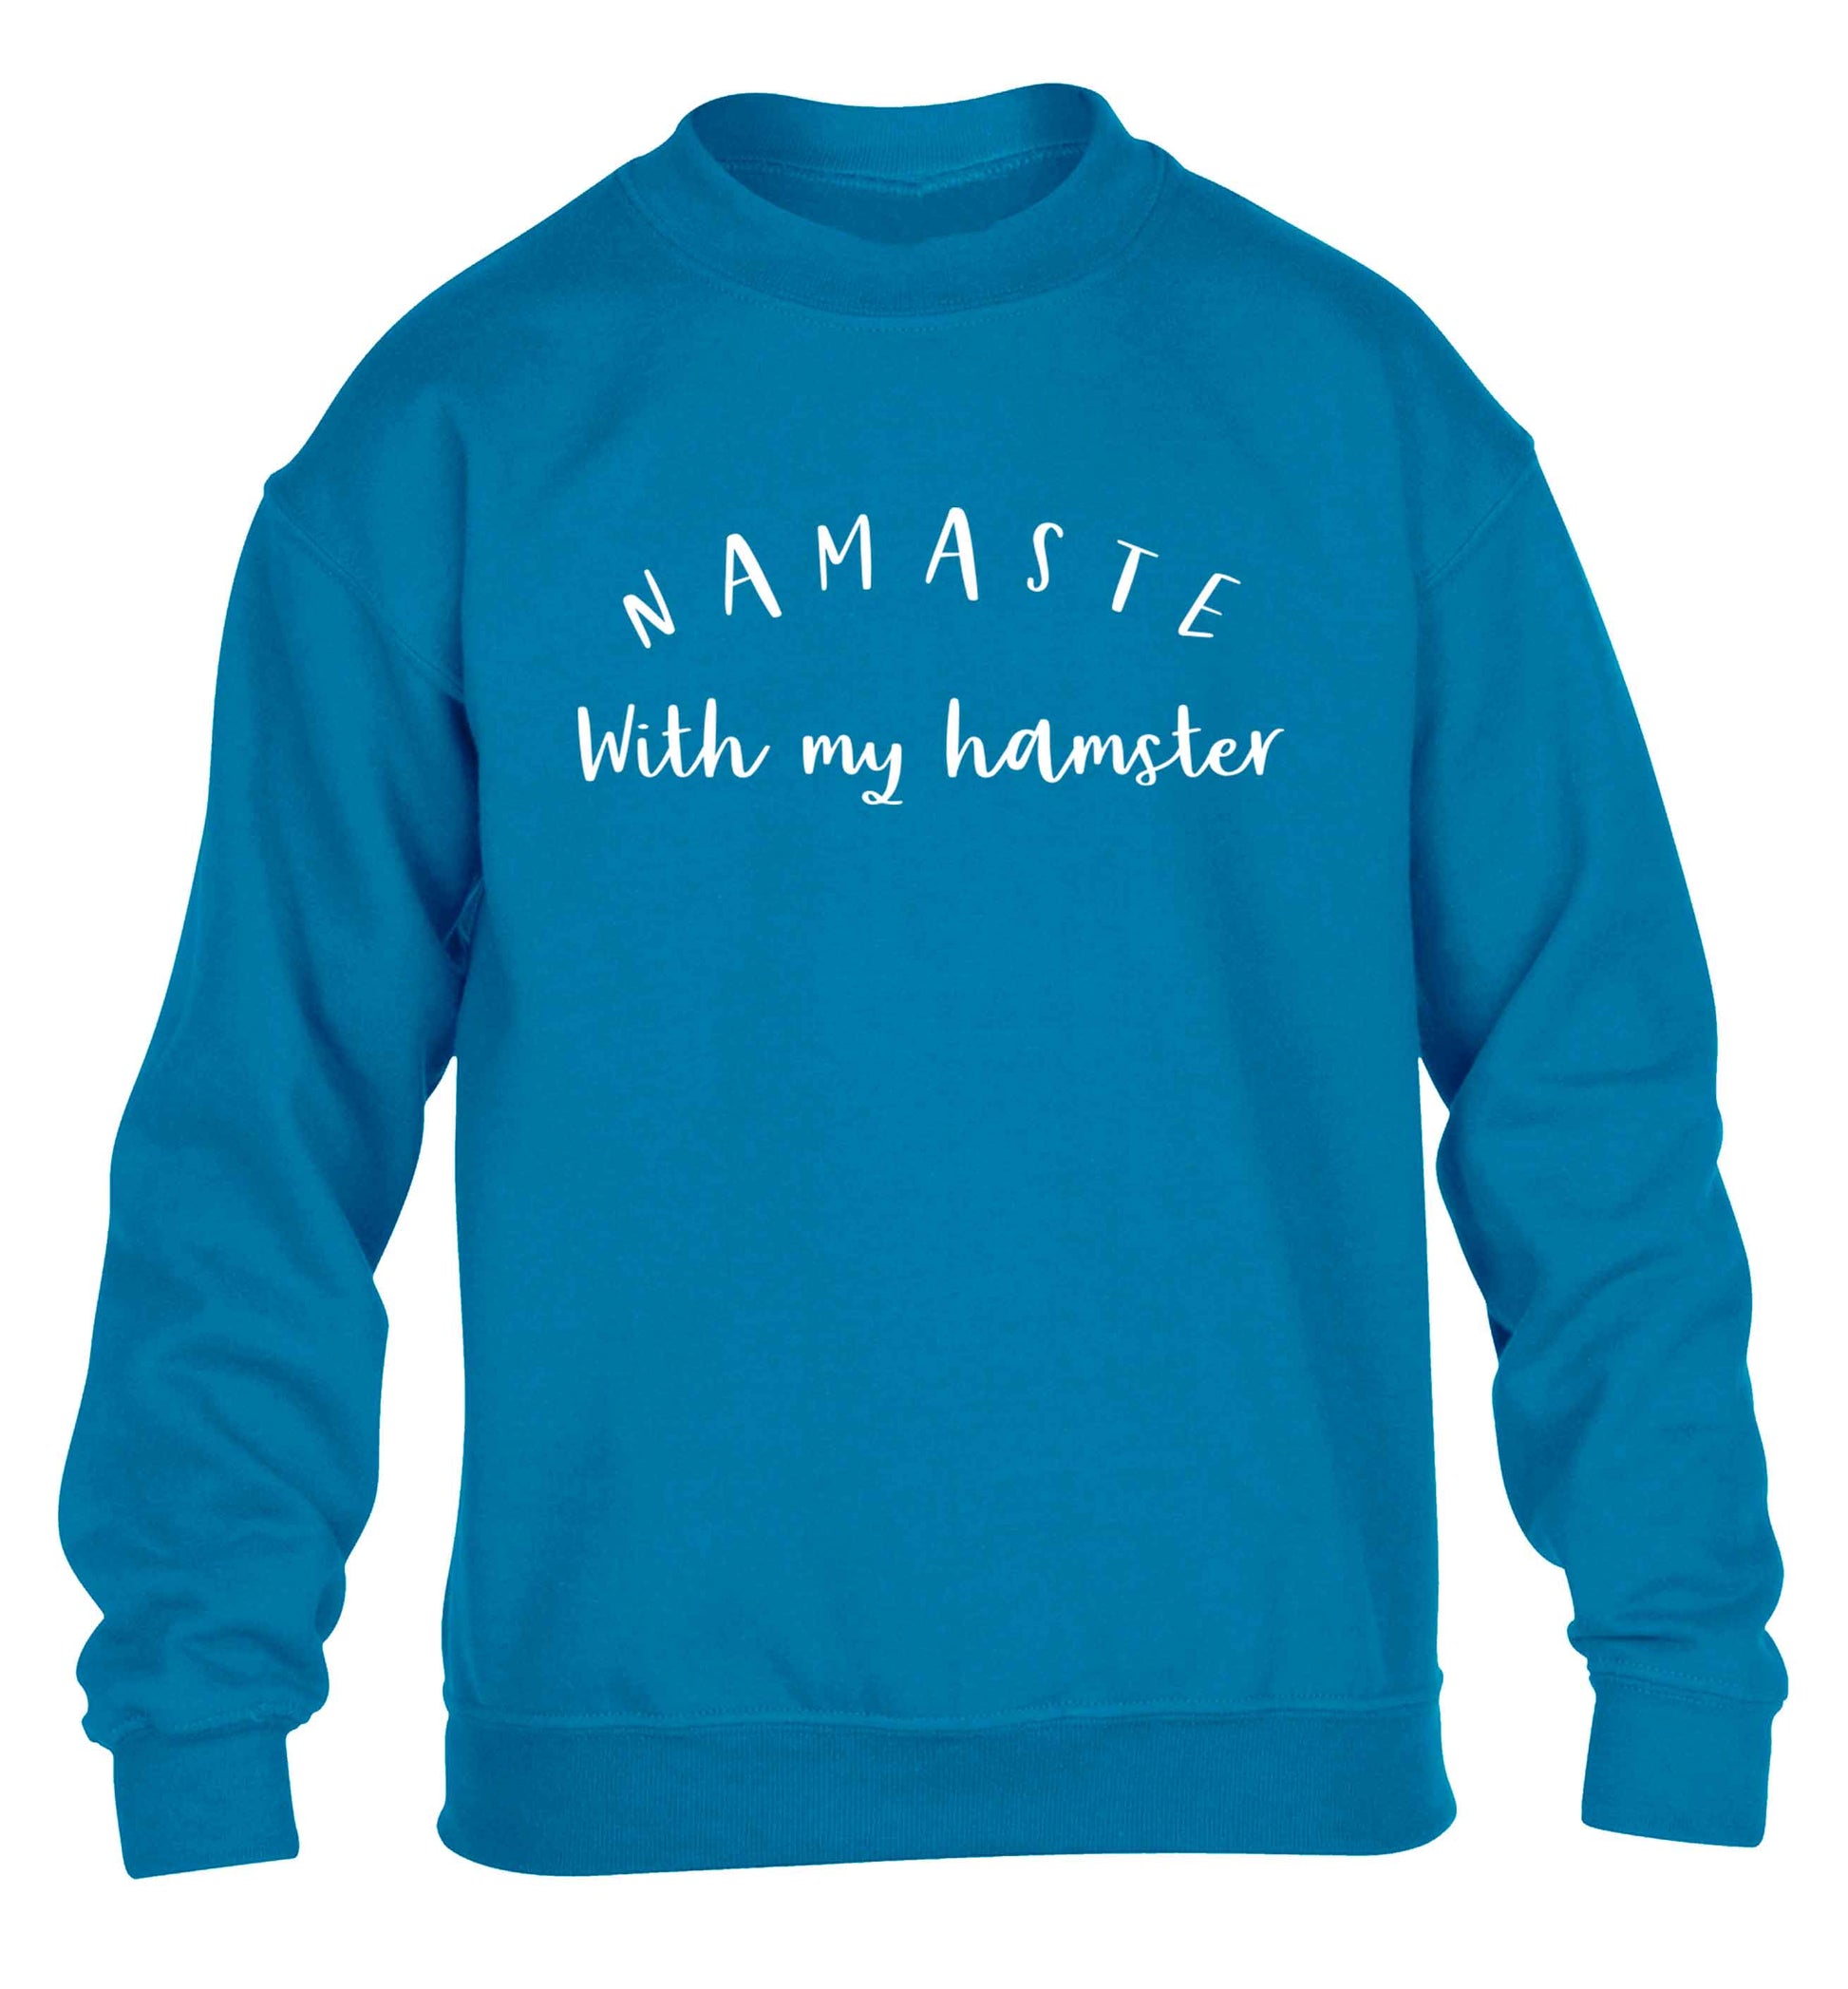 Namaste with my hamster children's blue sweater 12-13 Years